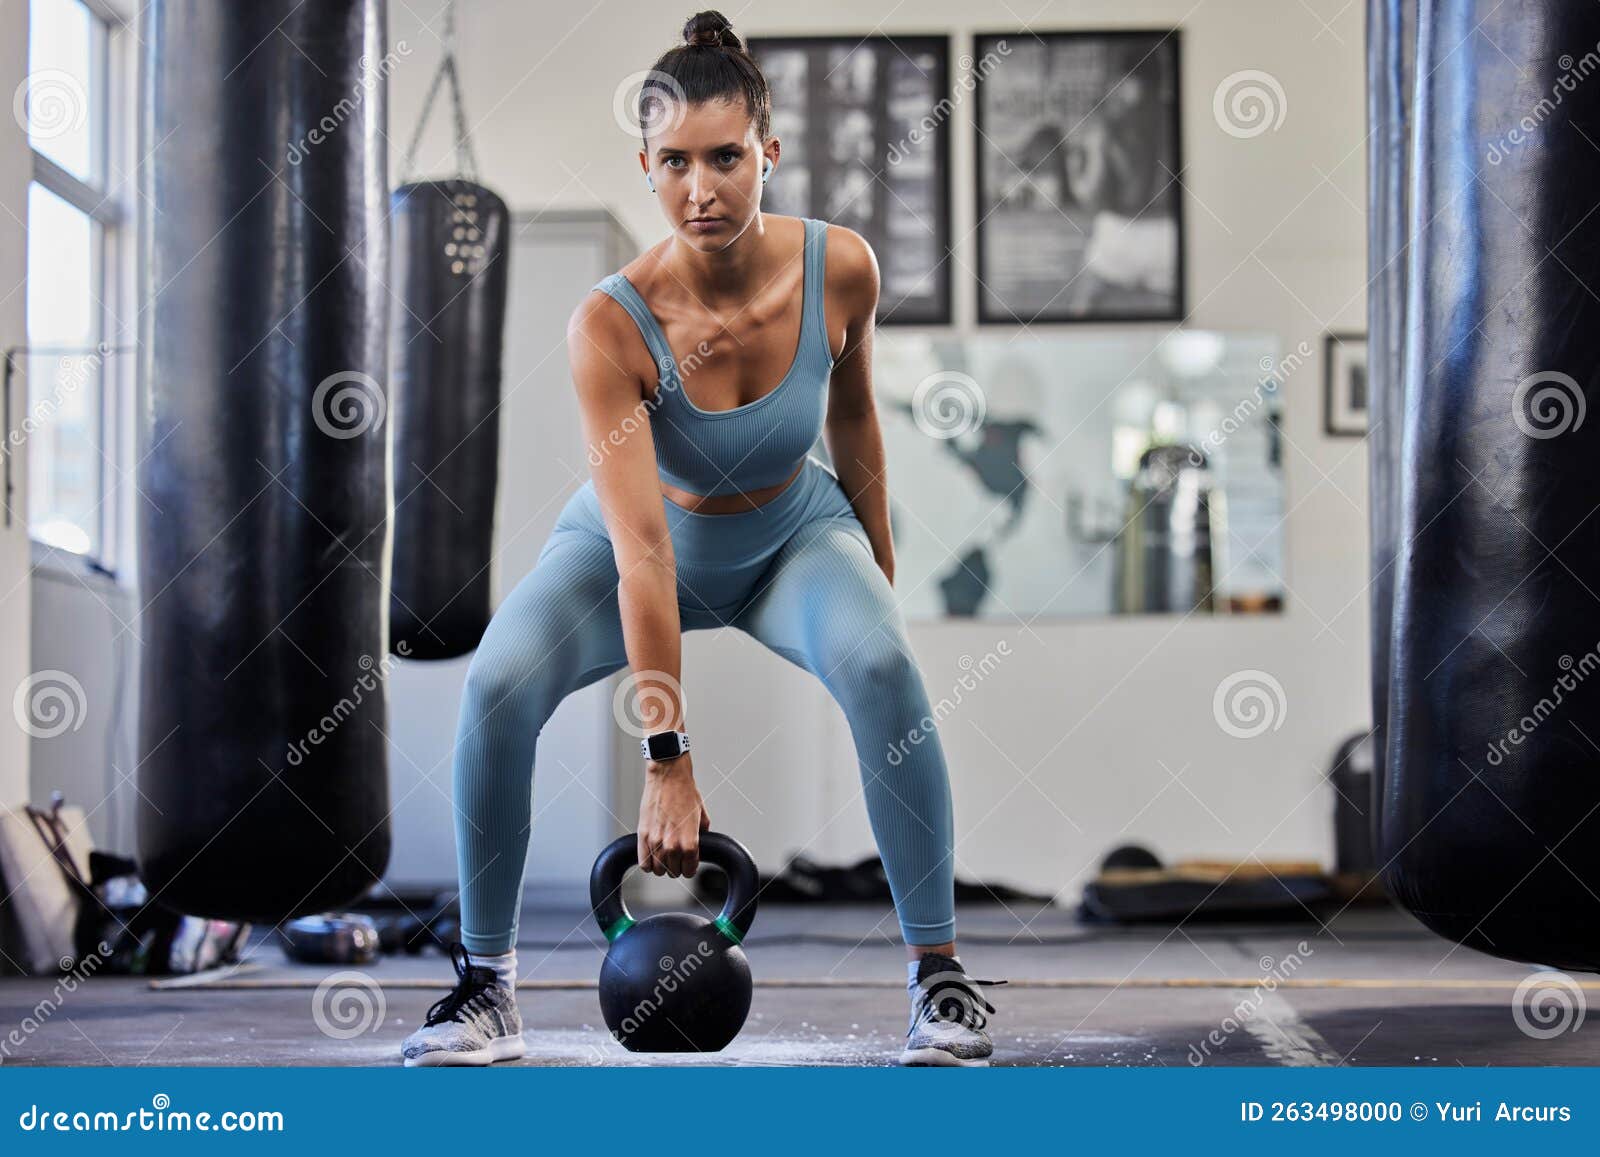 Gym Woman Weightlifting Kettlebell And Focus For Fitness Health And Training In Crossfit